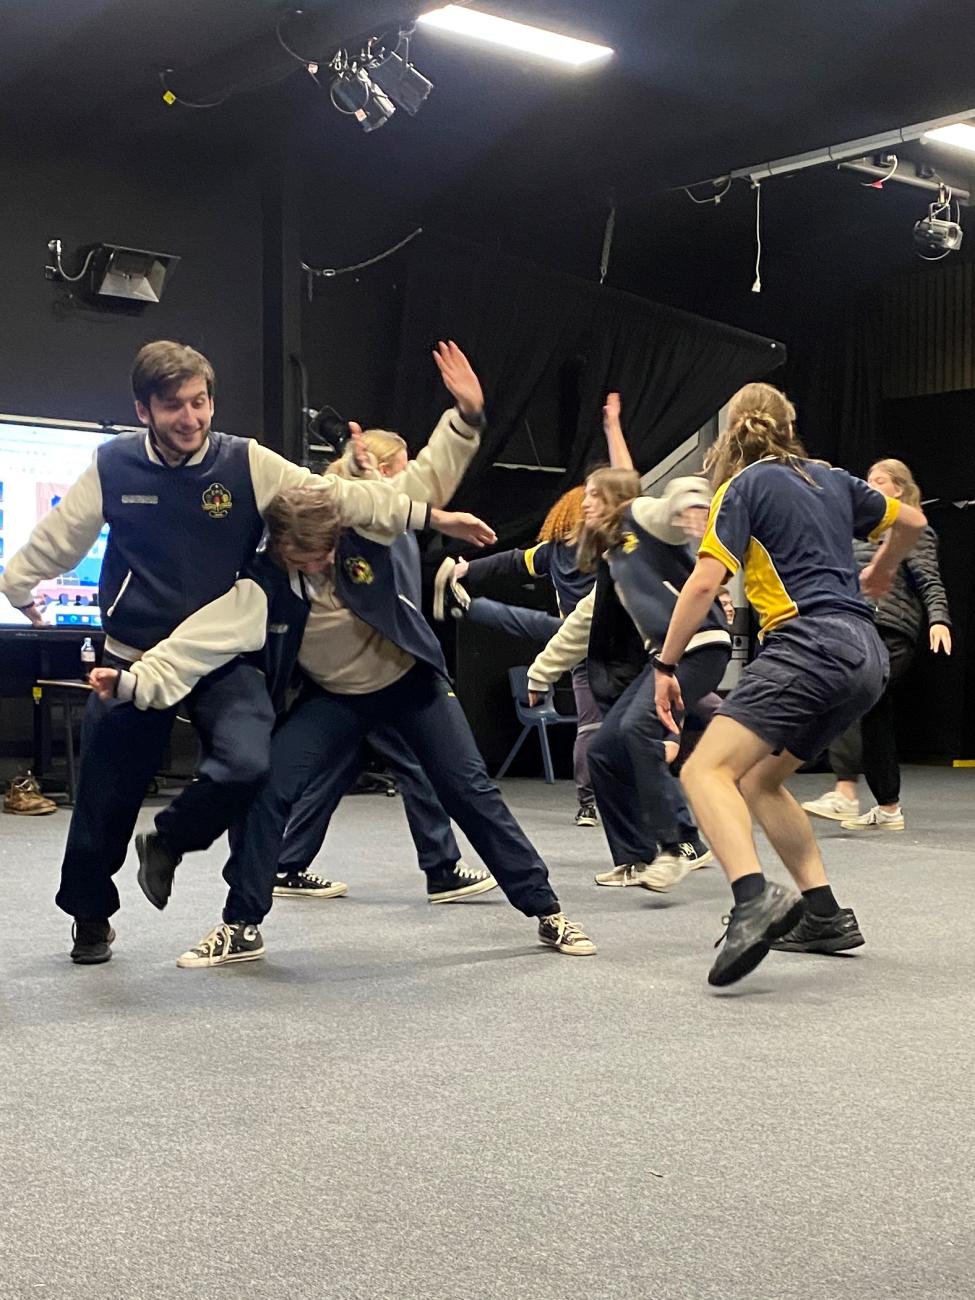 Senior students engaging in a pyhsical drama activity and moving around each other